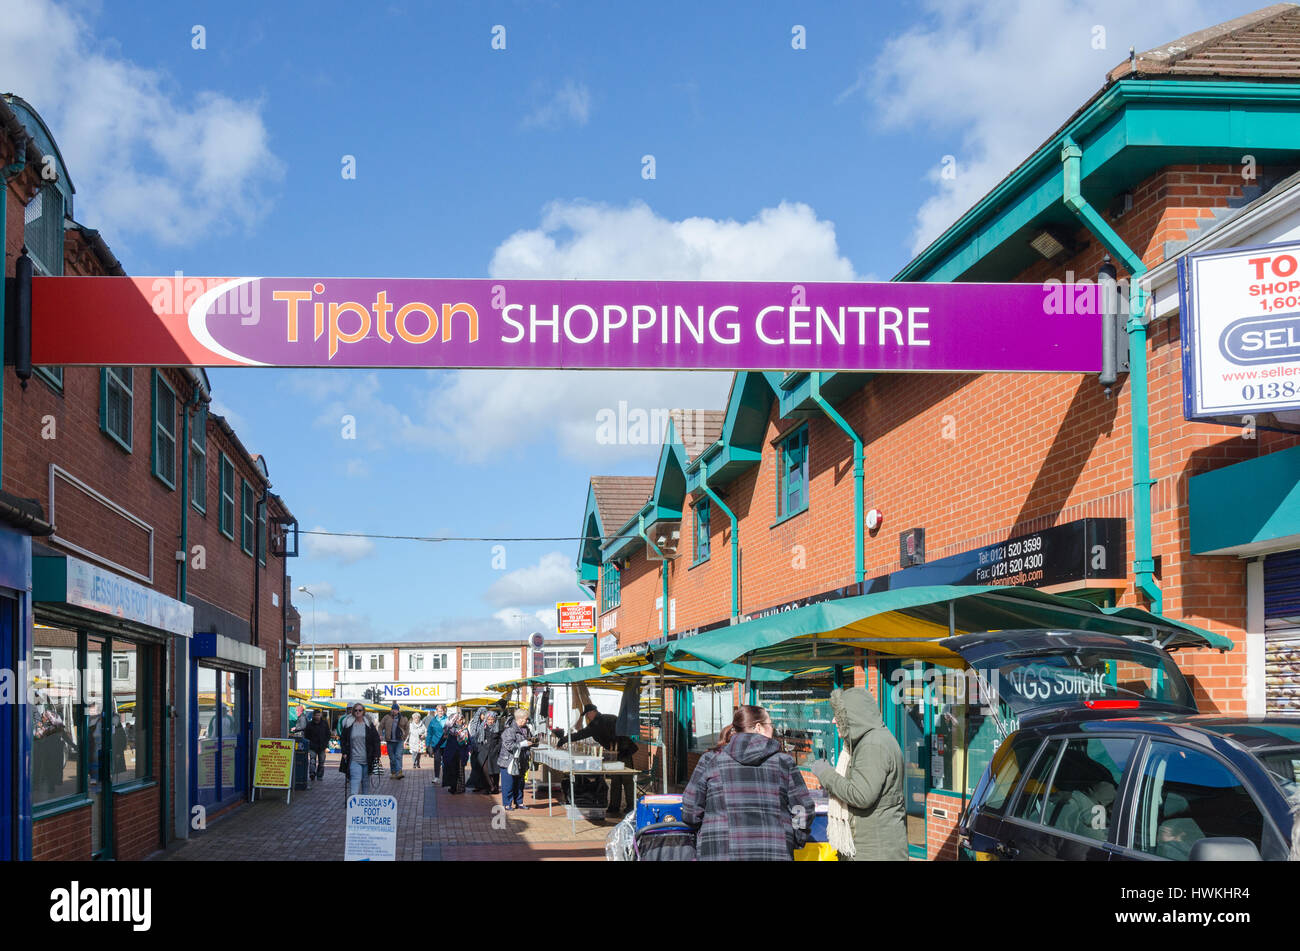 Tipton Shopping Centre in Black Country, West Midlands Foto Stock